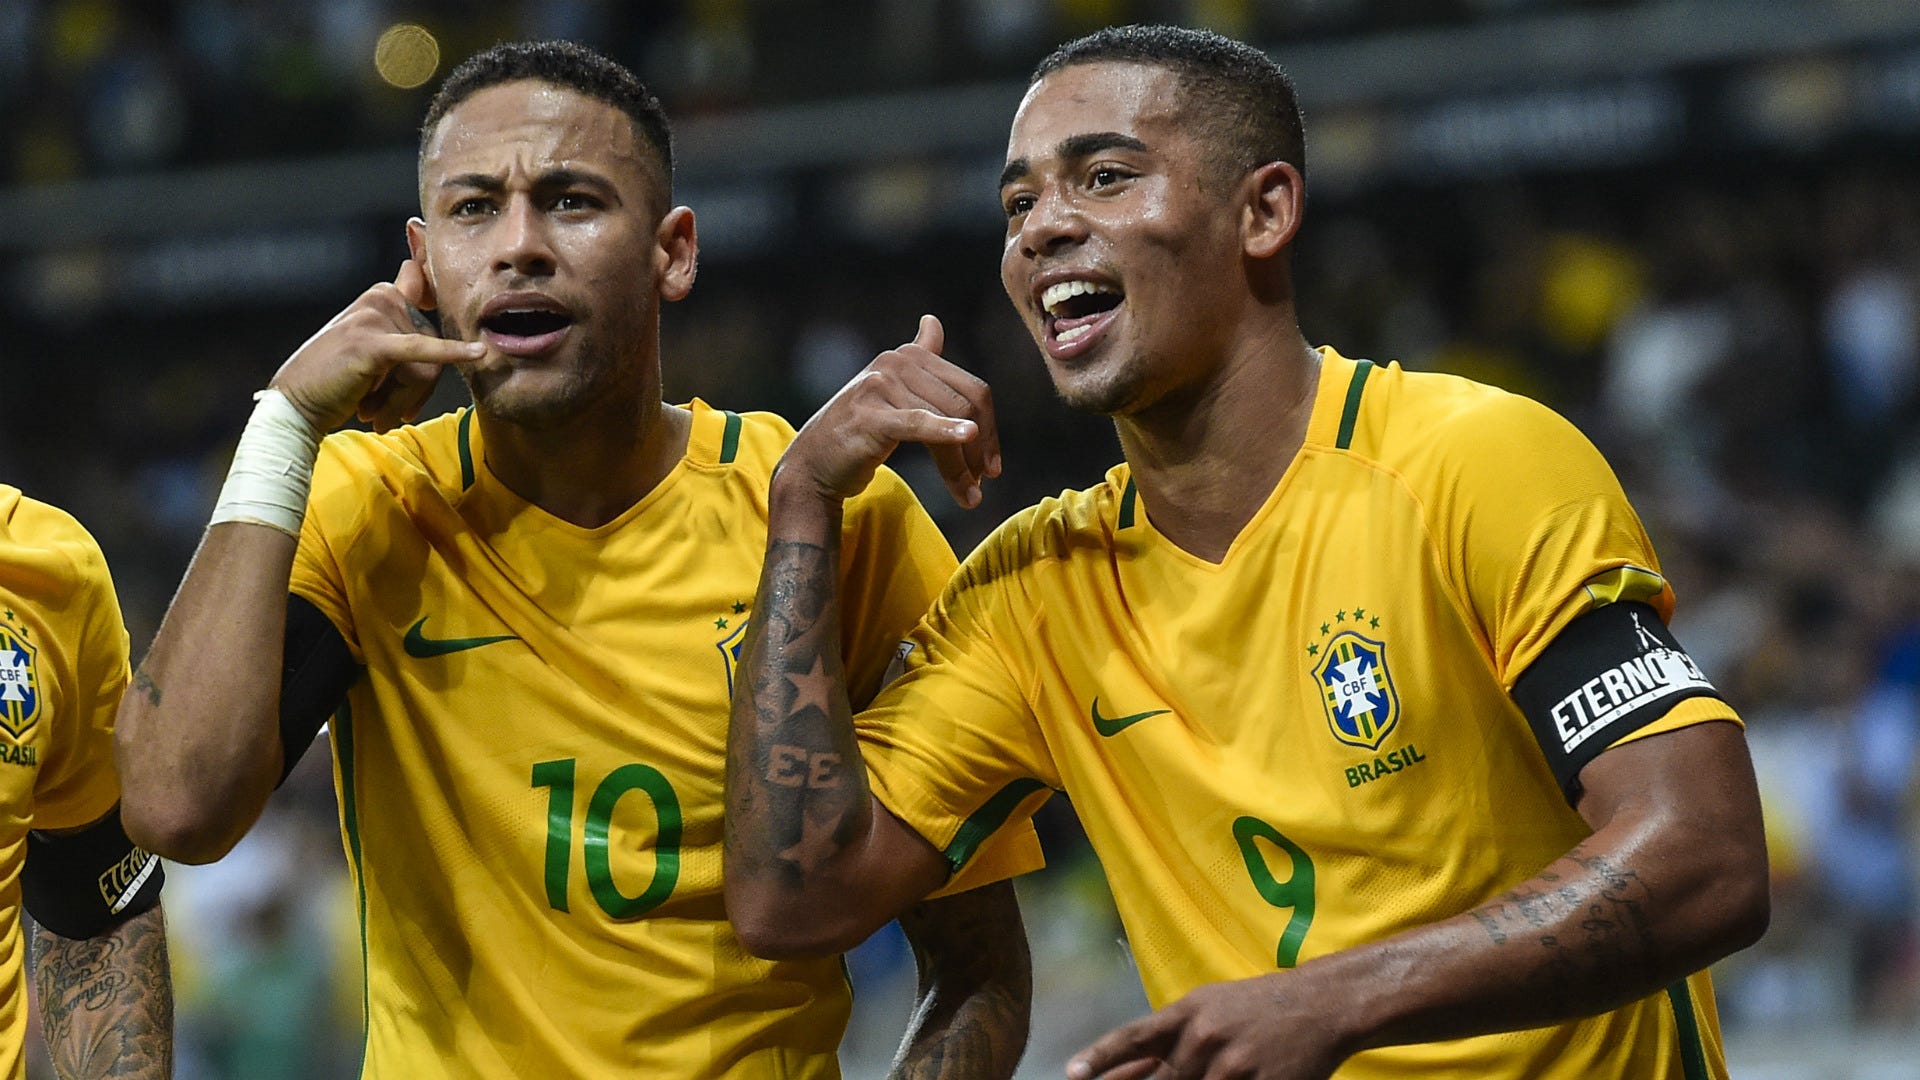 Gabriel Jesus Out To Follow In Neymar S Footsteps As He Targets 100 Brazil Caps Goals Record Goal Com